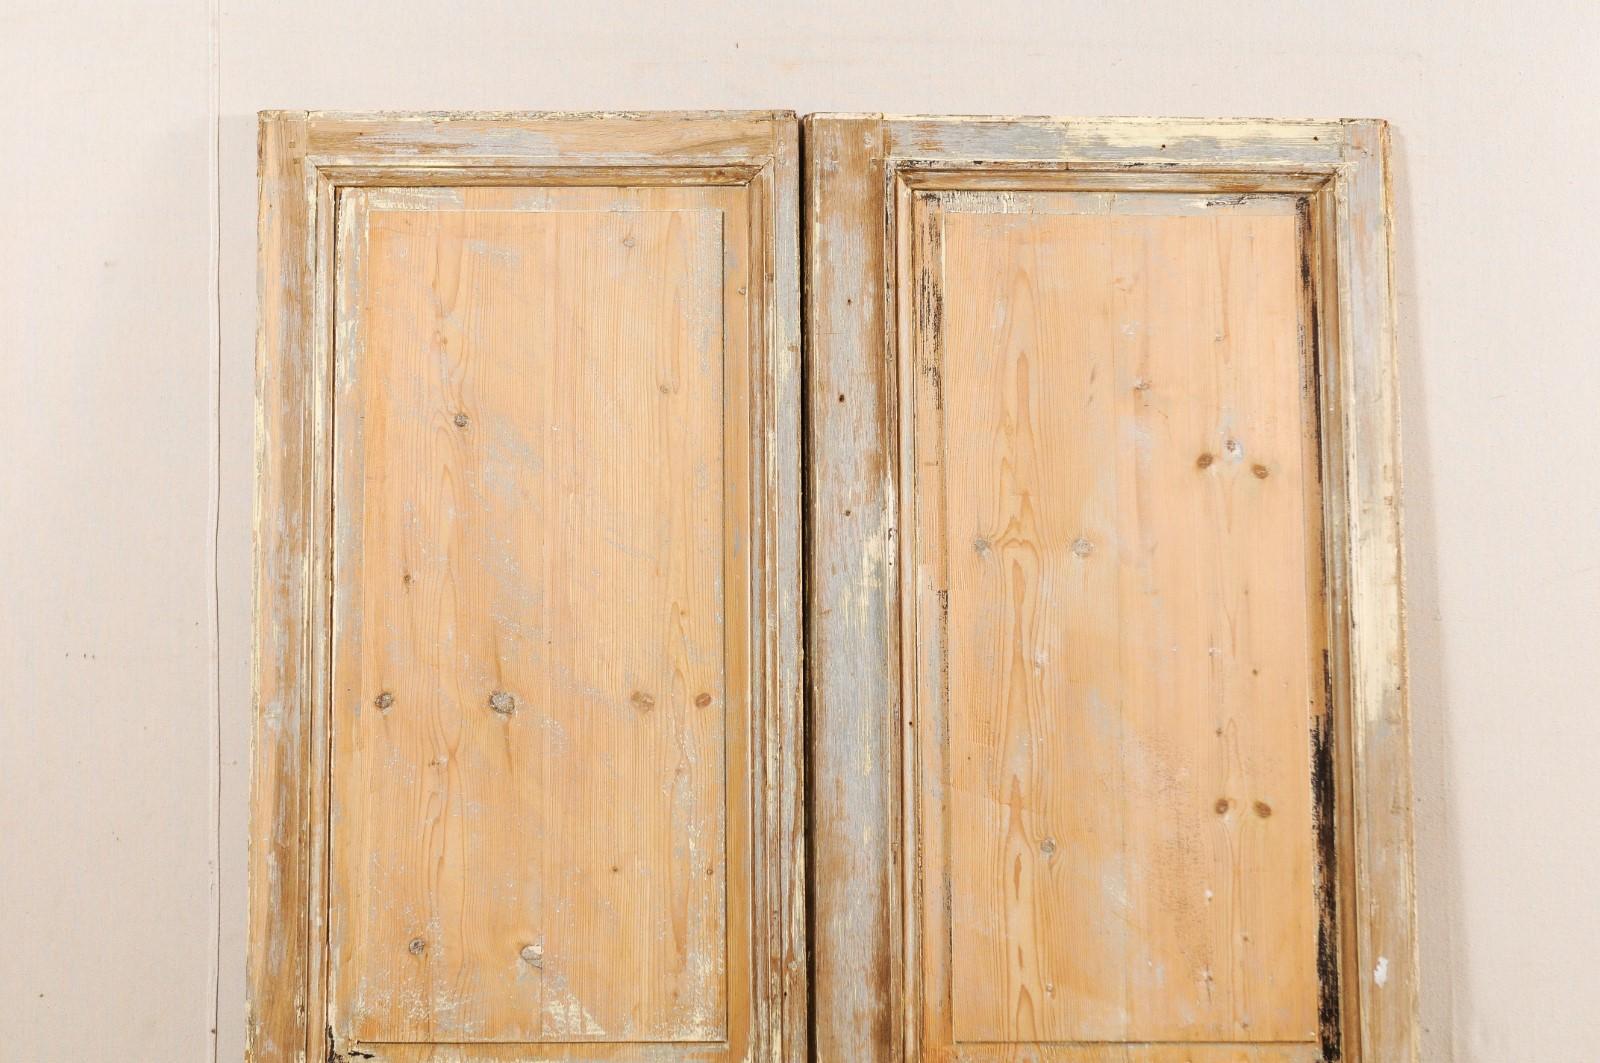 Pair of 19th Century French Painted Wood Doors with Lovely Cream Colored Finish 5